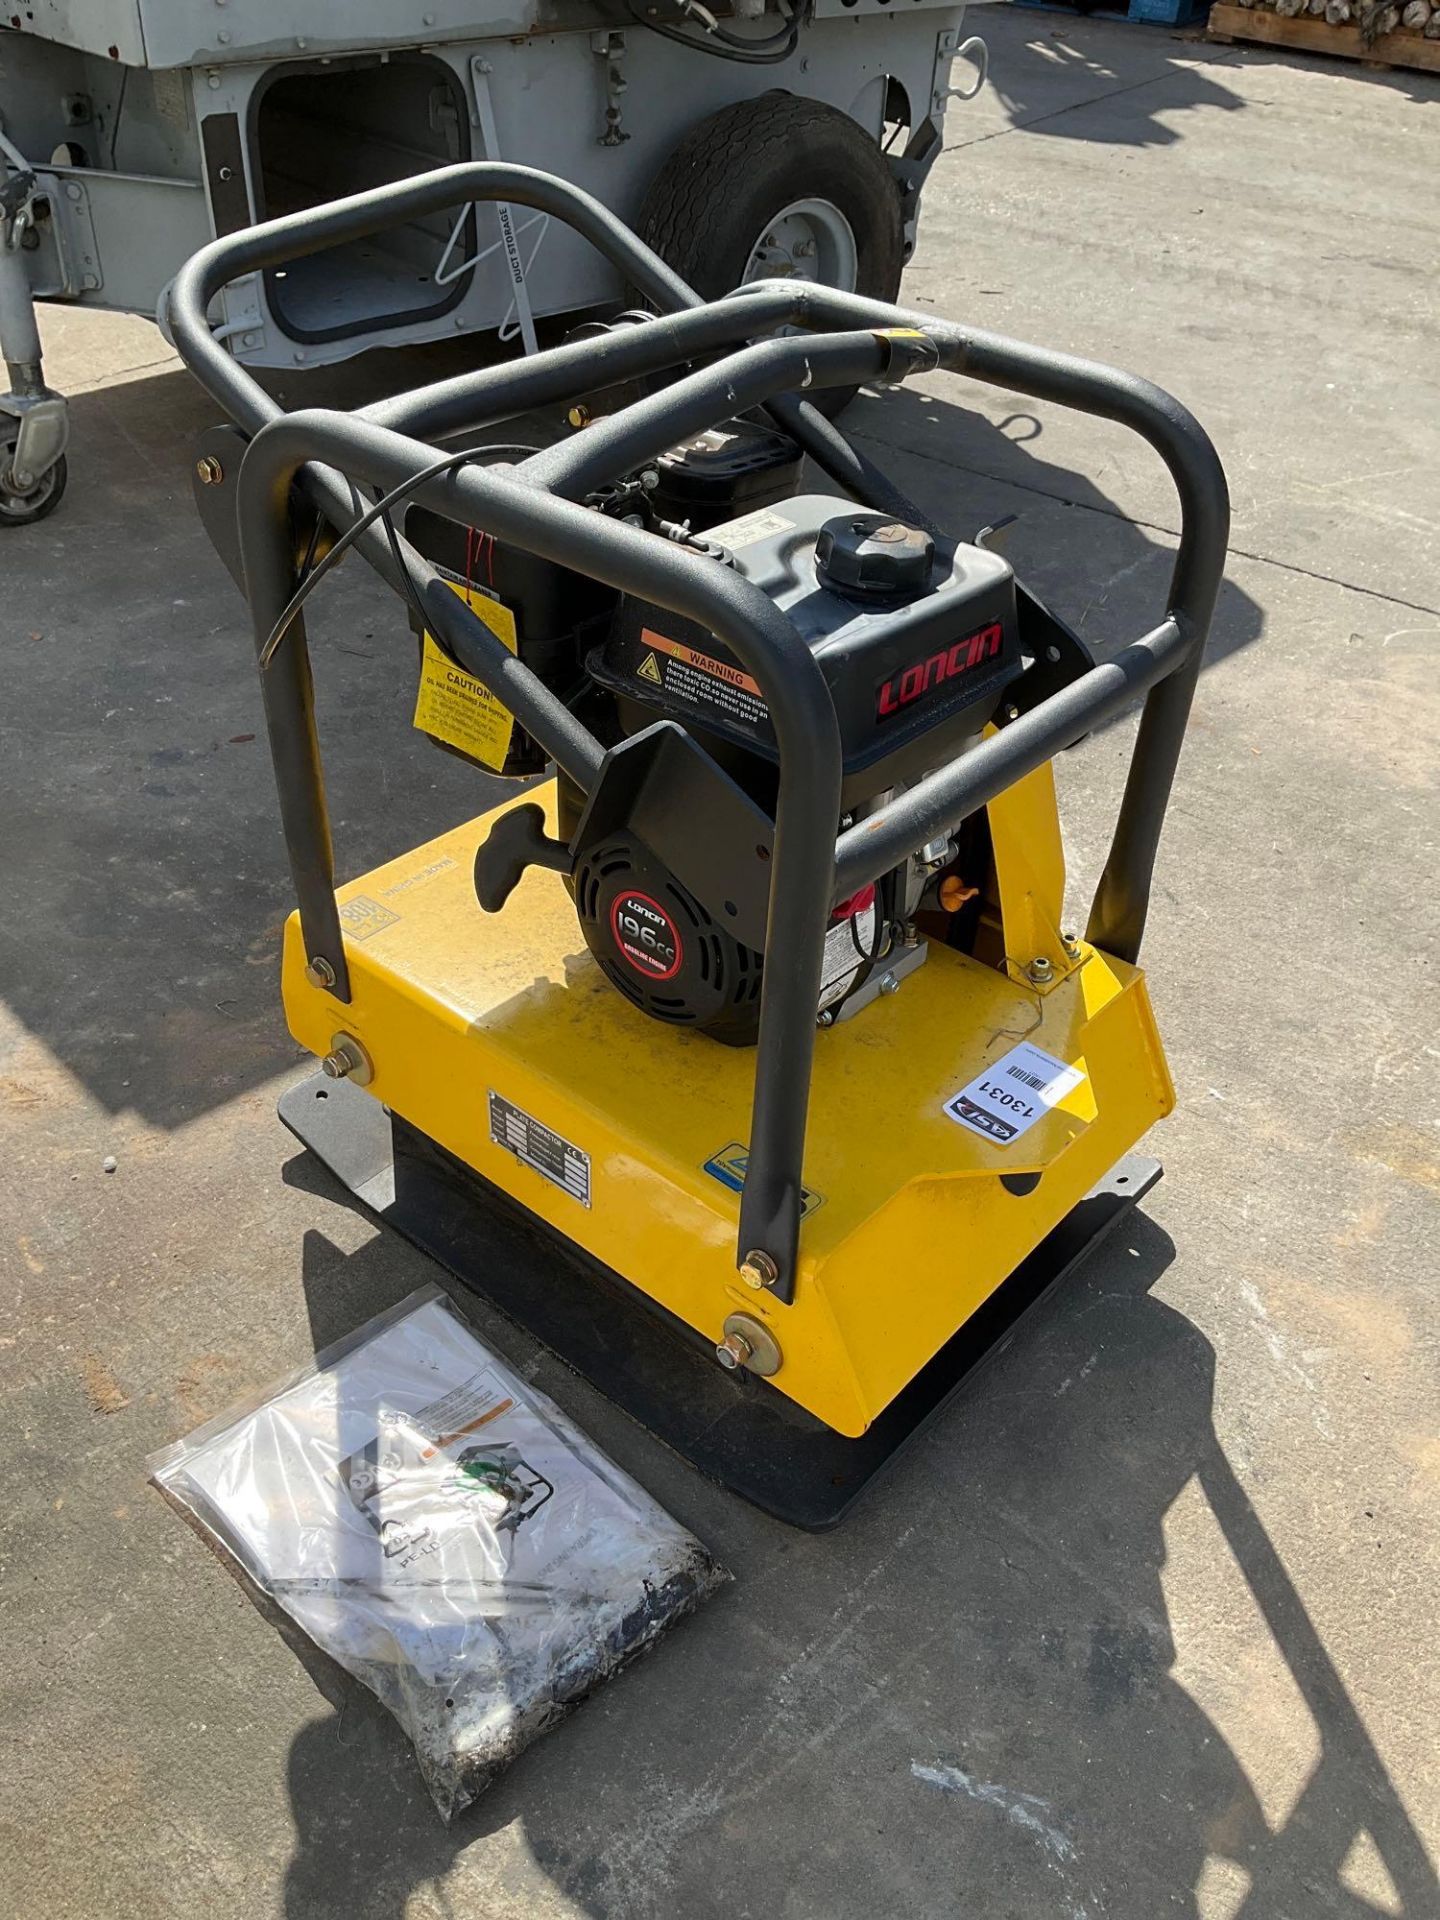 CT POWER PLATE COMPACTOR MODEL C120 WITH LONCIN 196 cc MOTOR, GAS POWERED, APPROX 4.1 KW, APPROX 420